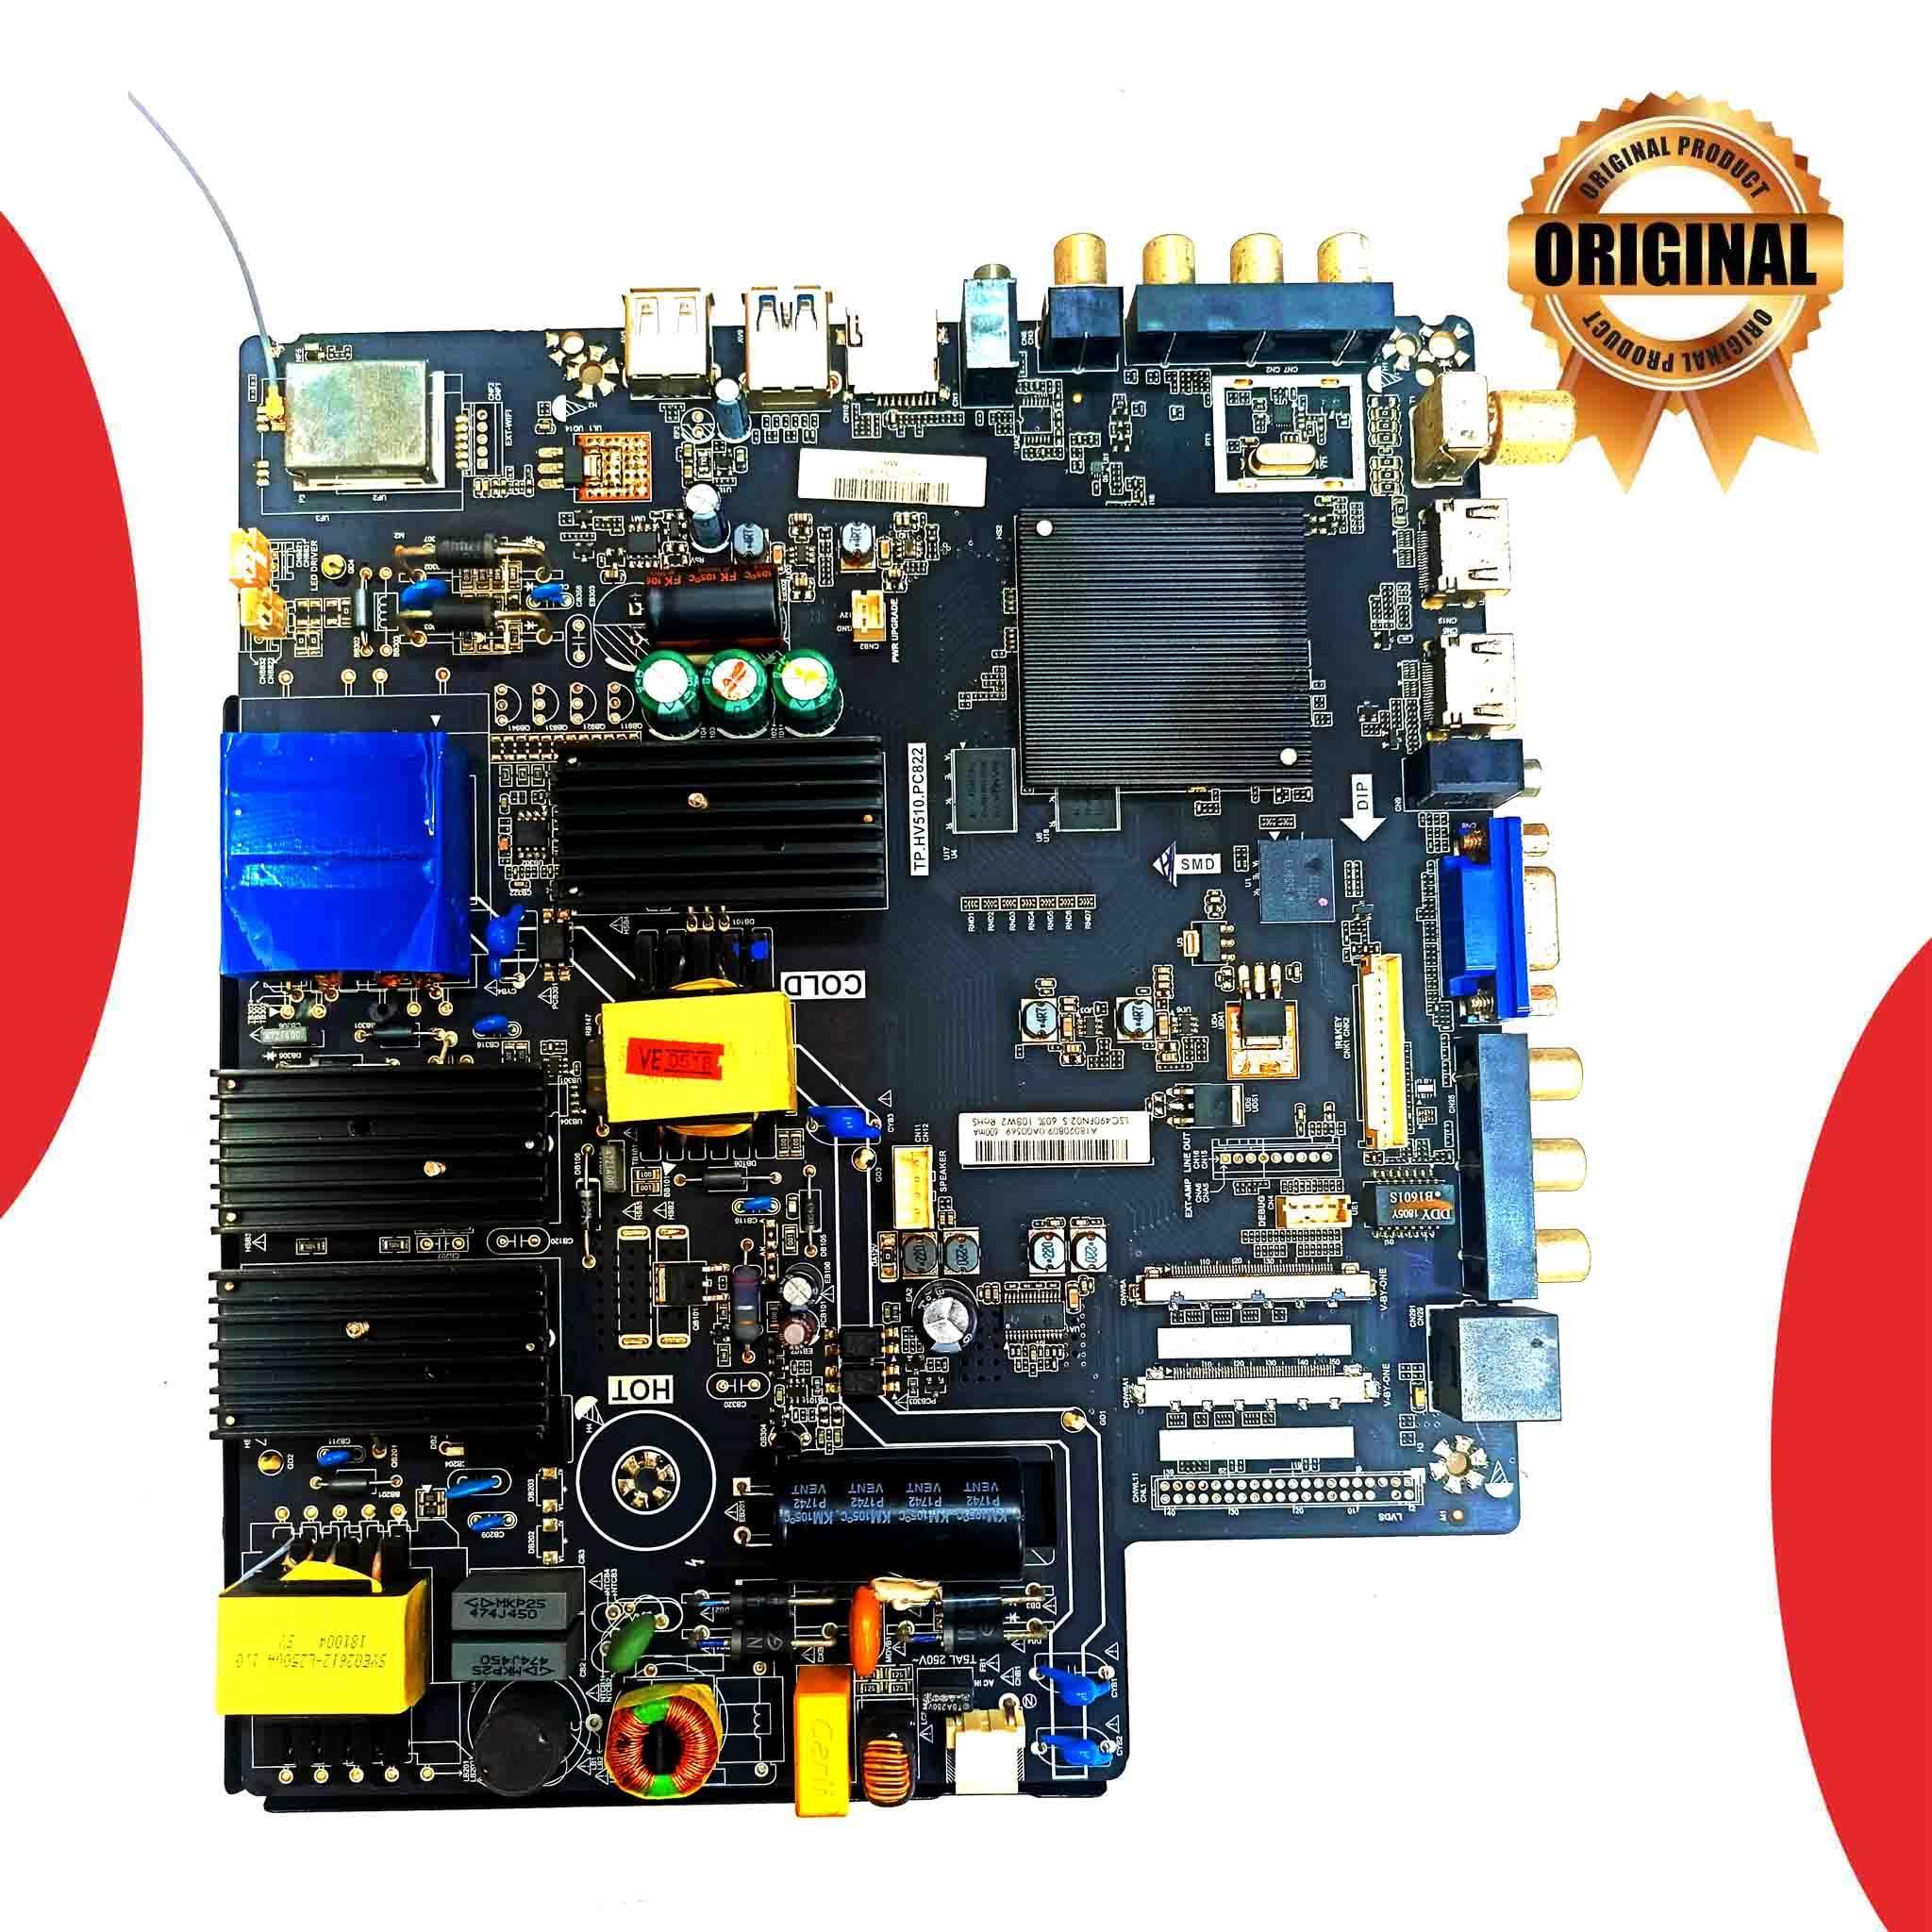 Croma 49 inch LED TV Motherboard for Model CREL7342 - Great Bharat Electronics